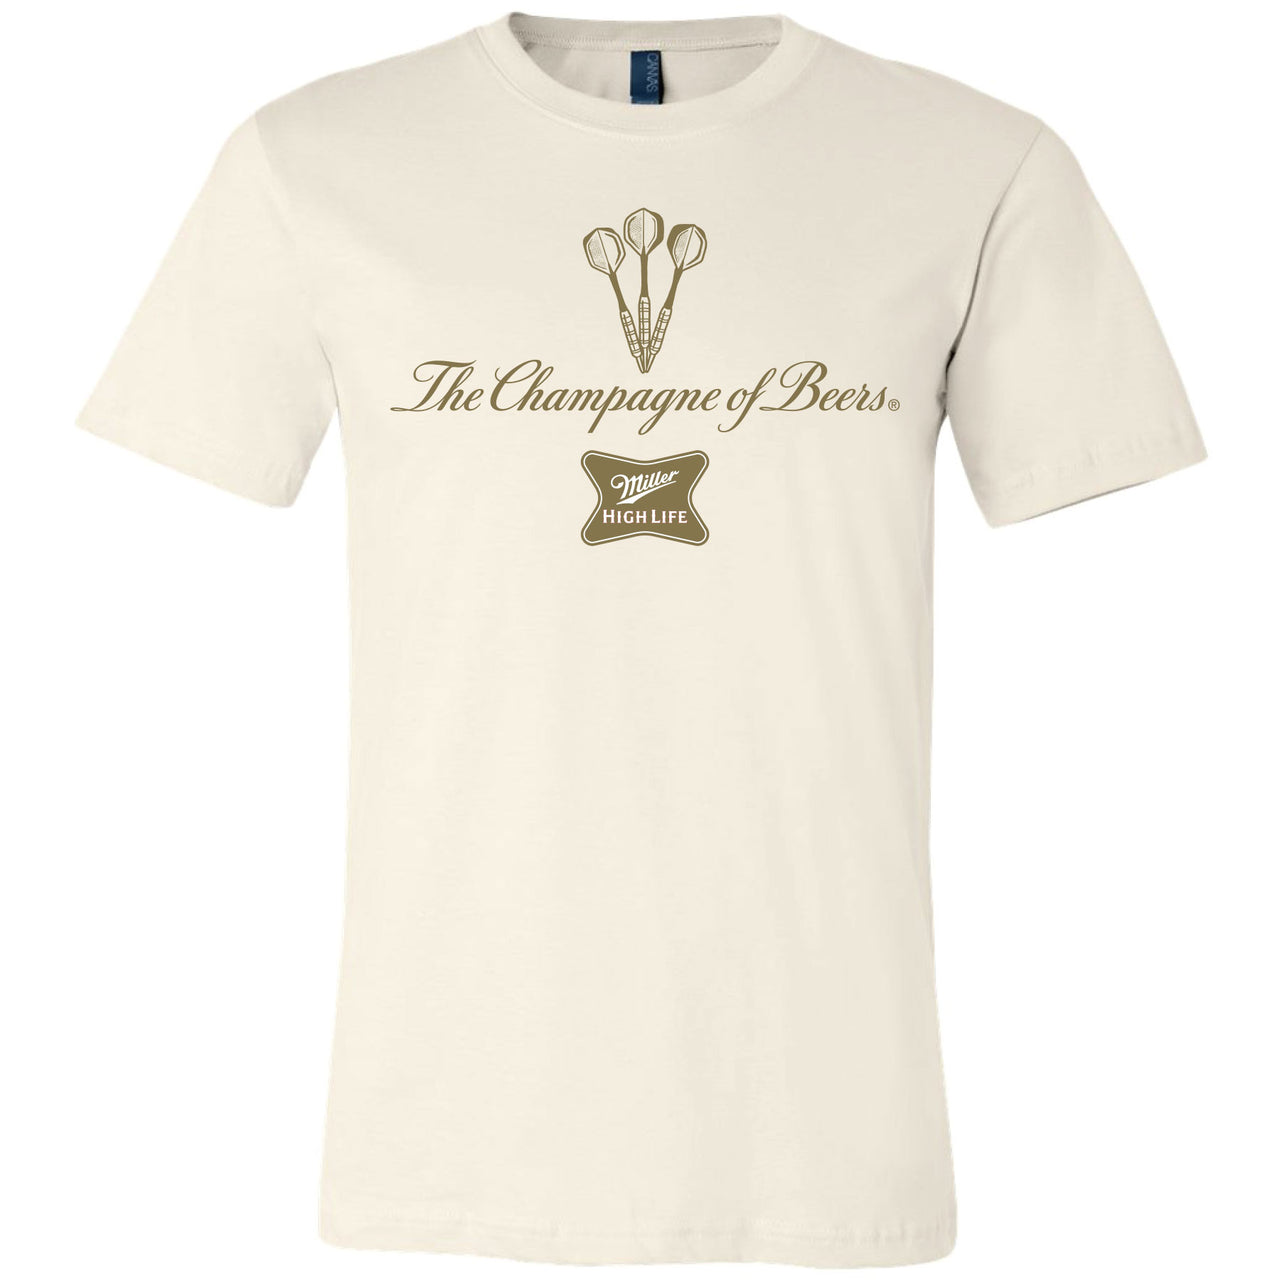 Miller High Life - The Champagne of Beers Darts T-shirt